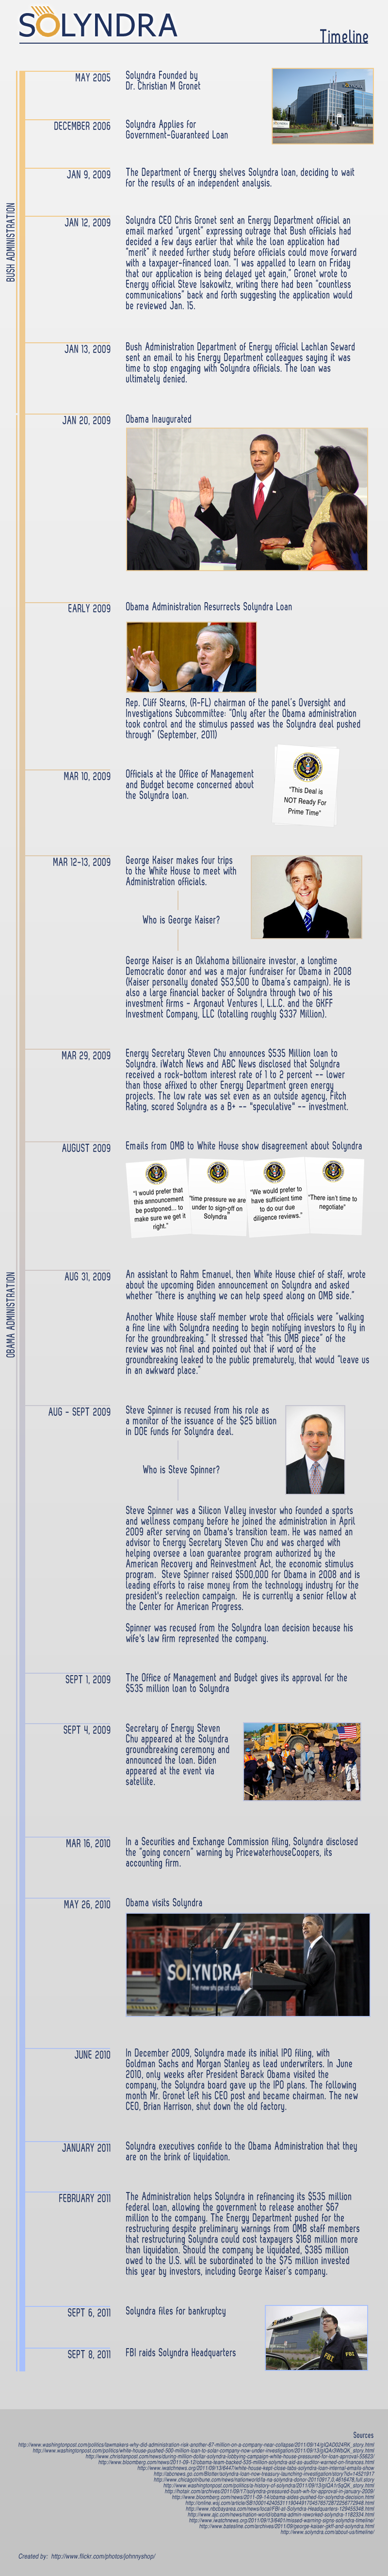 [Infographic] Solyndra Timeline